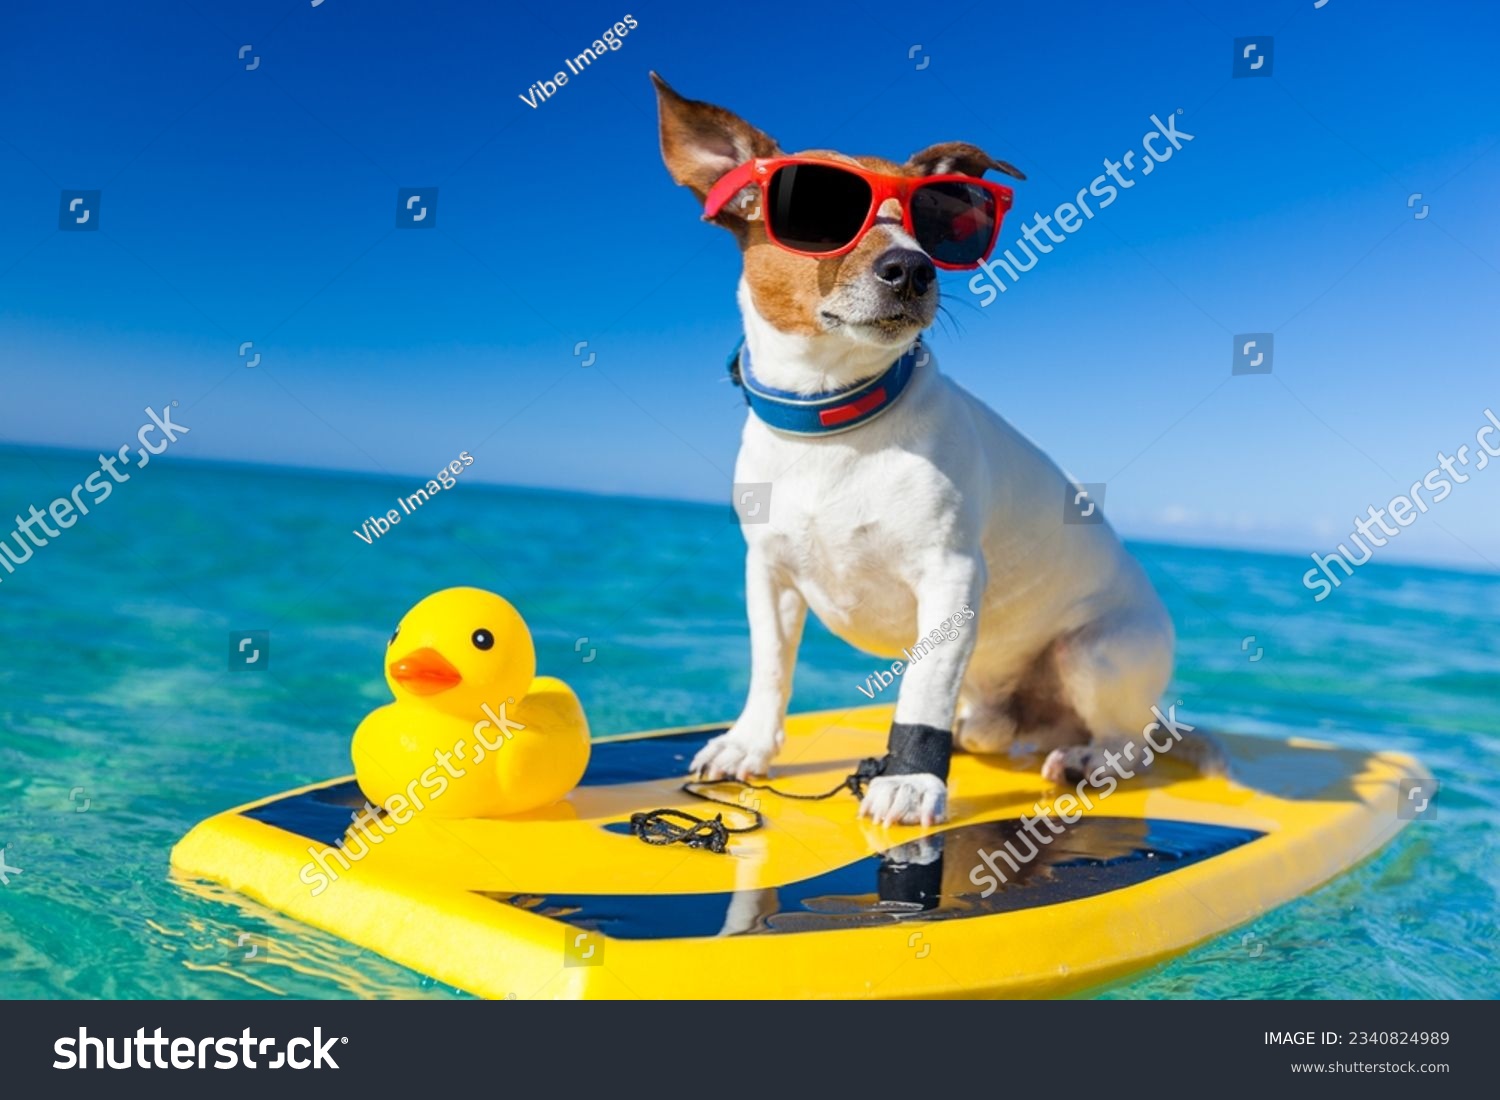 dog surfing on a surfboard wearing sunglasses with a yellow plastic rubber duck, at the ocean shore #2340824989